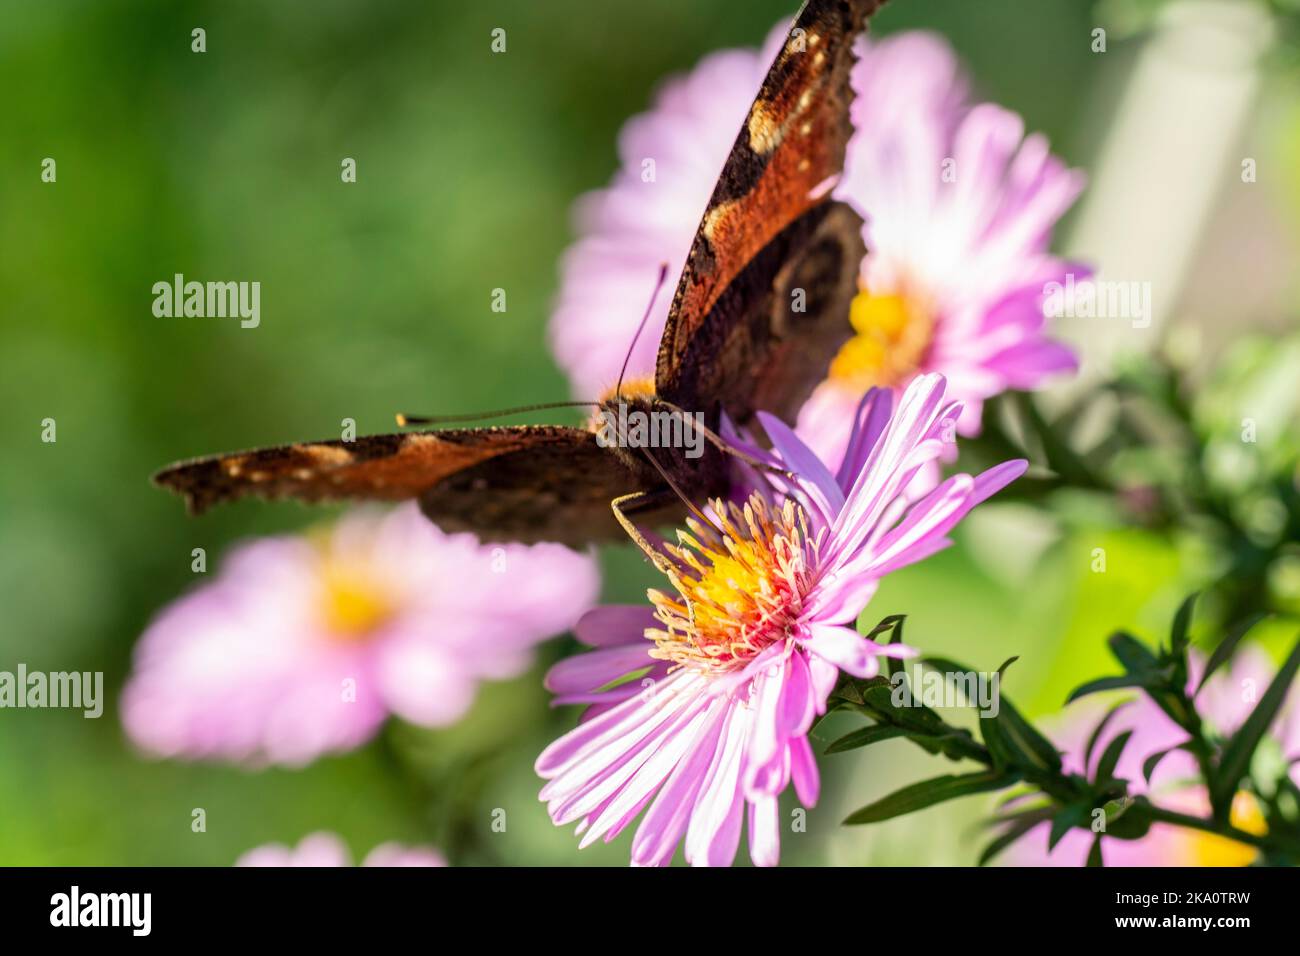 Aglais io or  the European peacock butterfly sitting on the blooming Symphyotrichum novi-belgii flowers or New York aster. Stock Photo